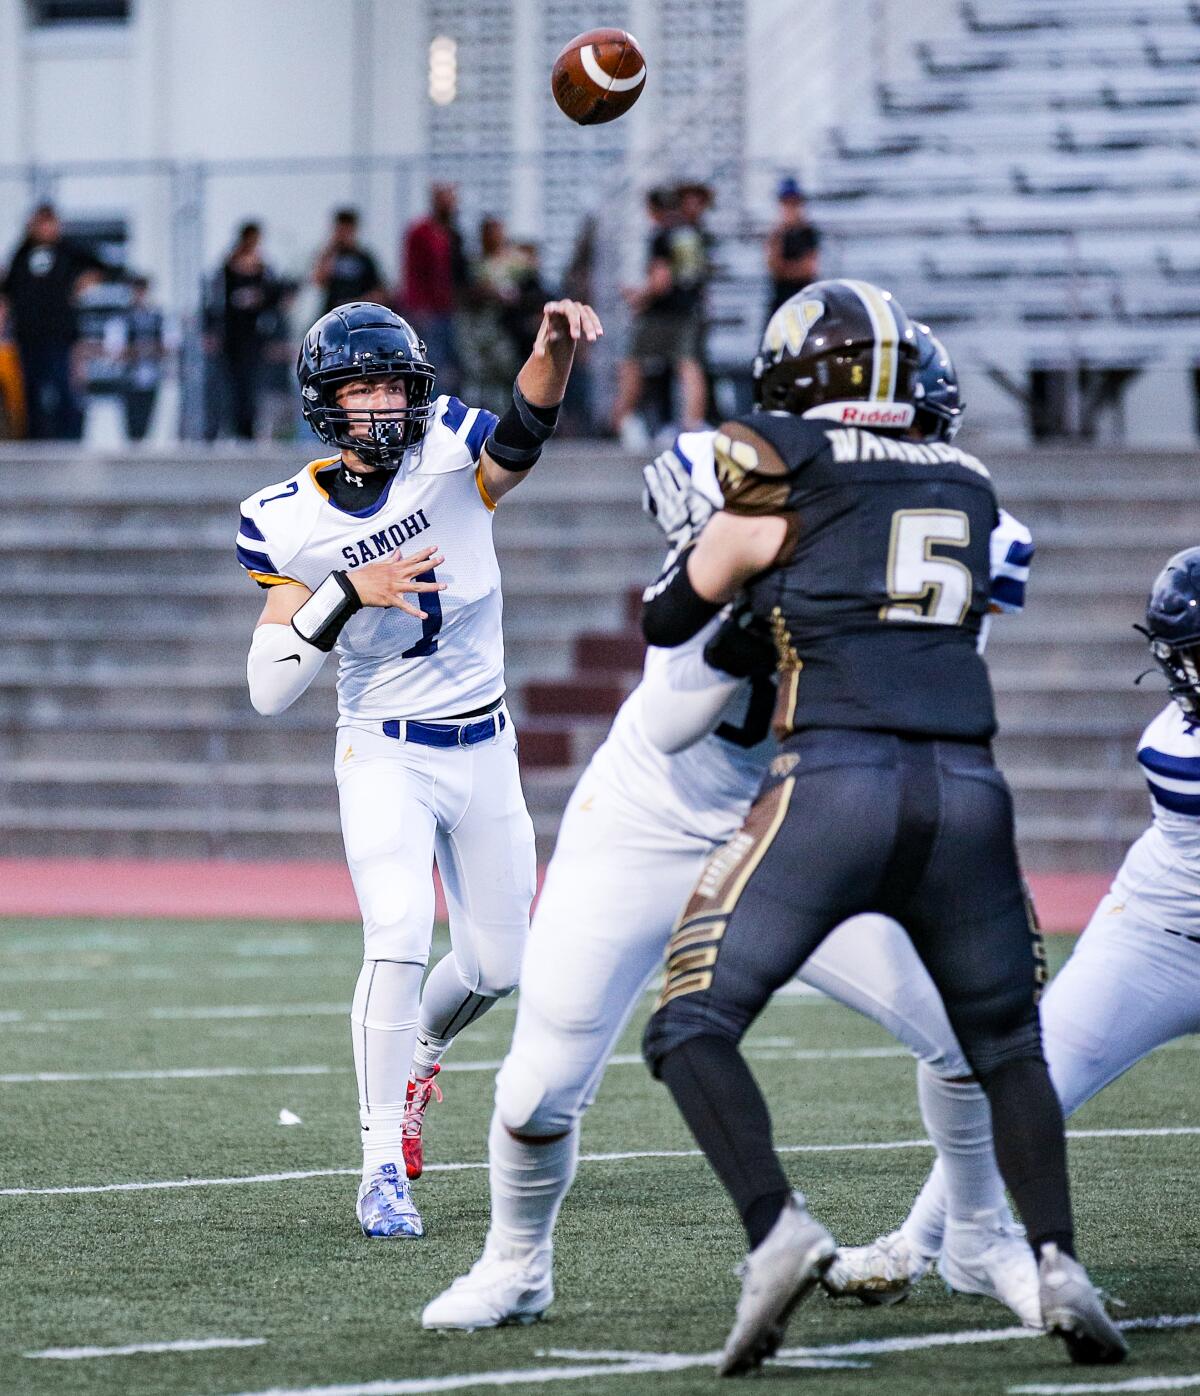 Sophomore quarterback Wyatt Brown of Santa Monica throws a pass against West Torrance on Friday night.